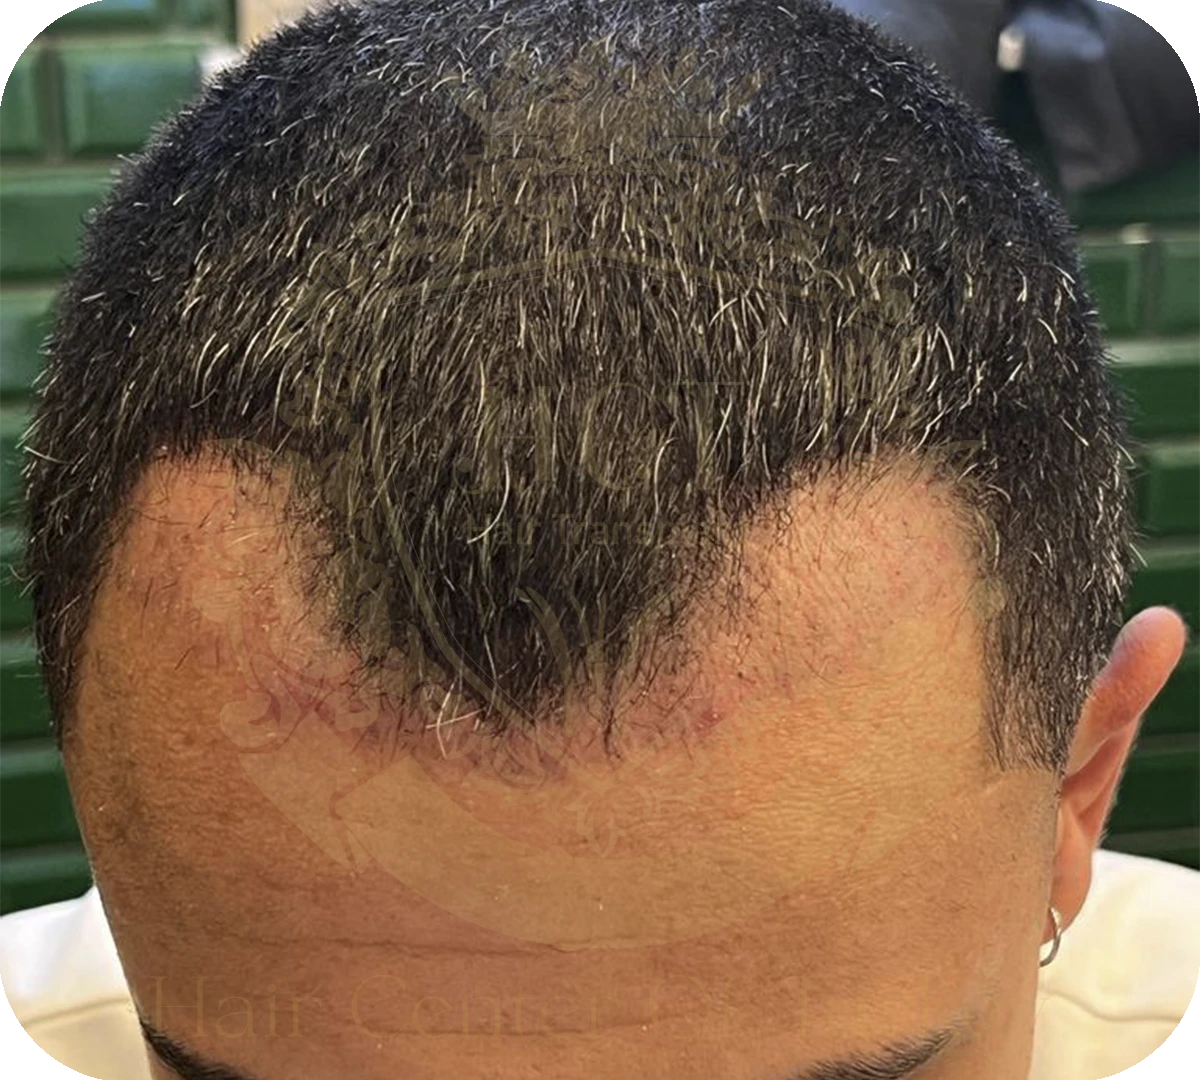 Shock Loss After Hair Transplant